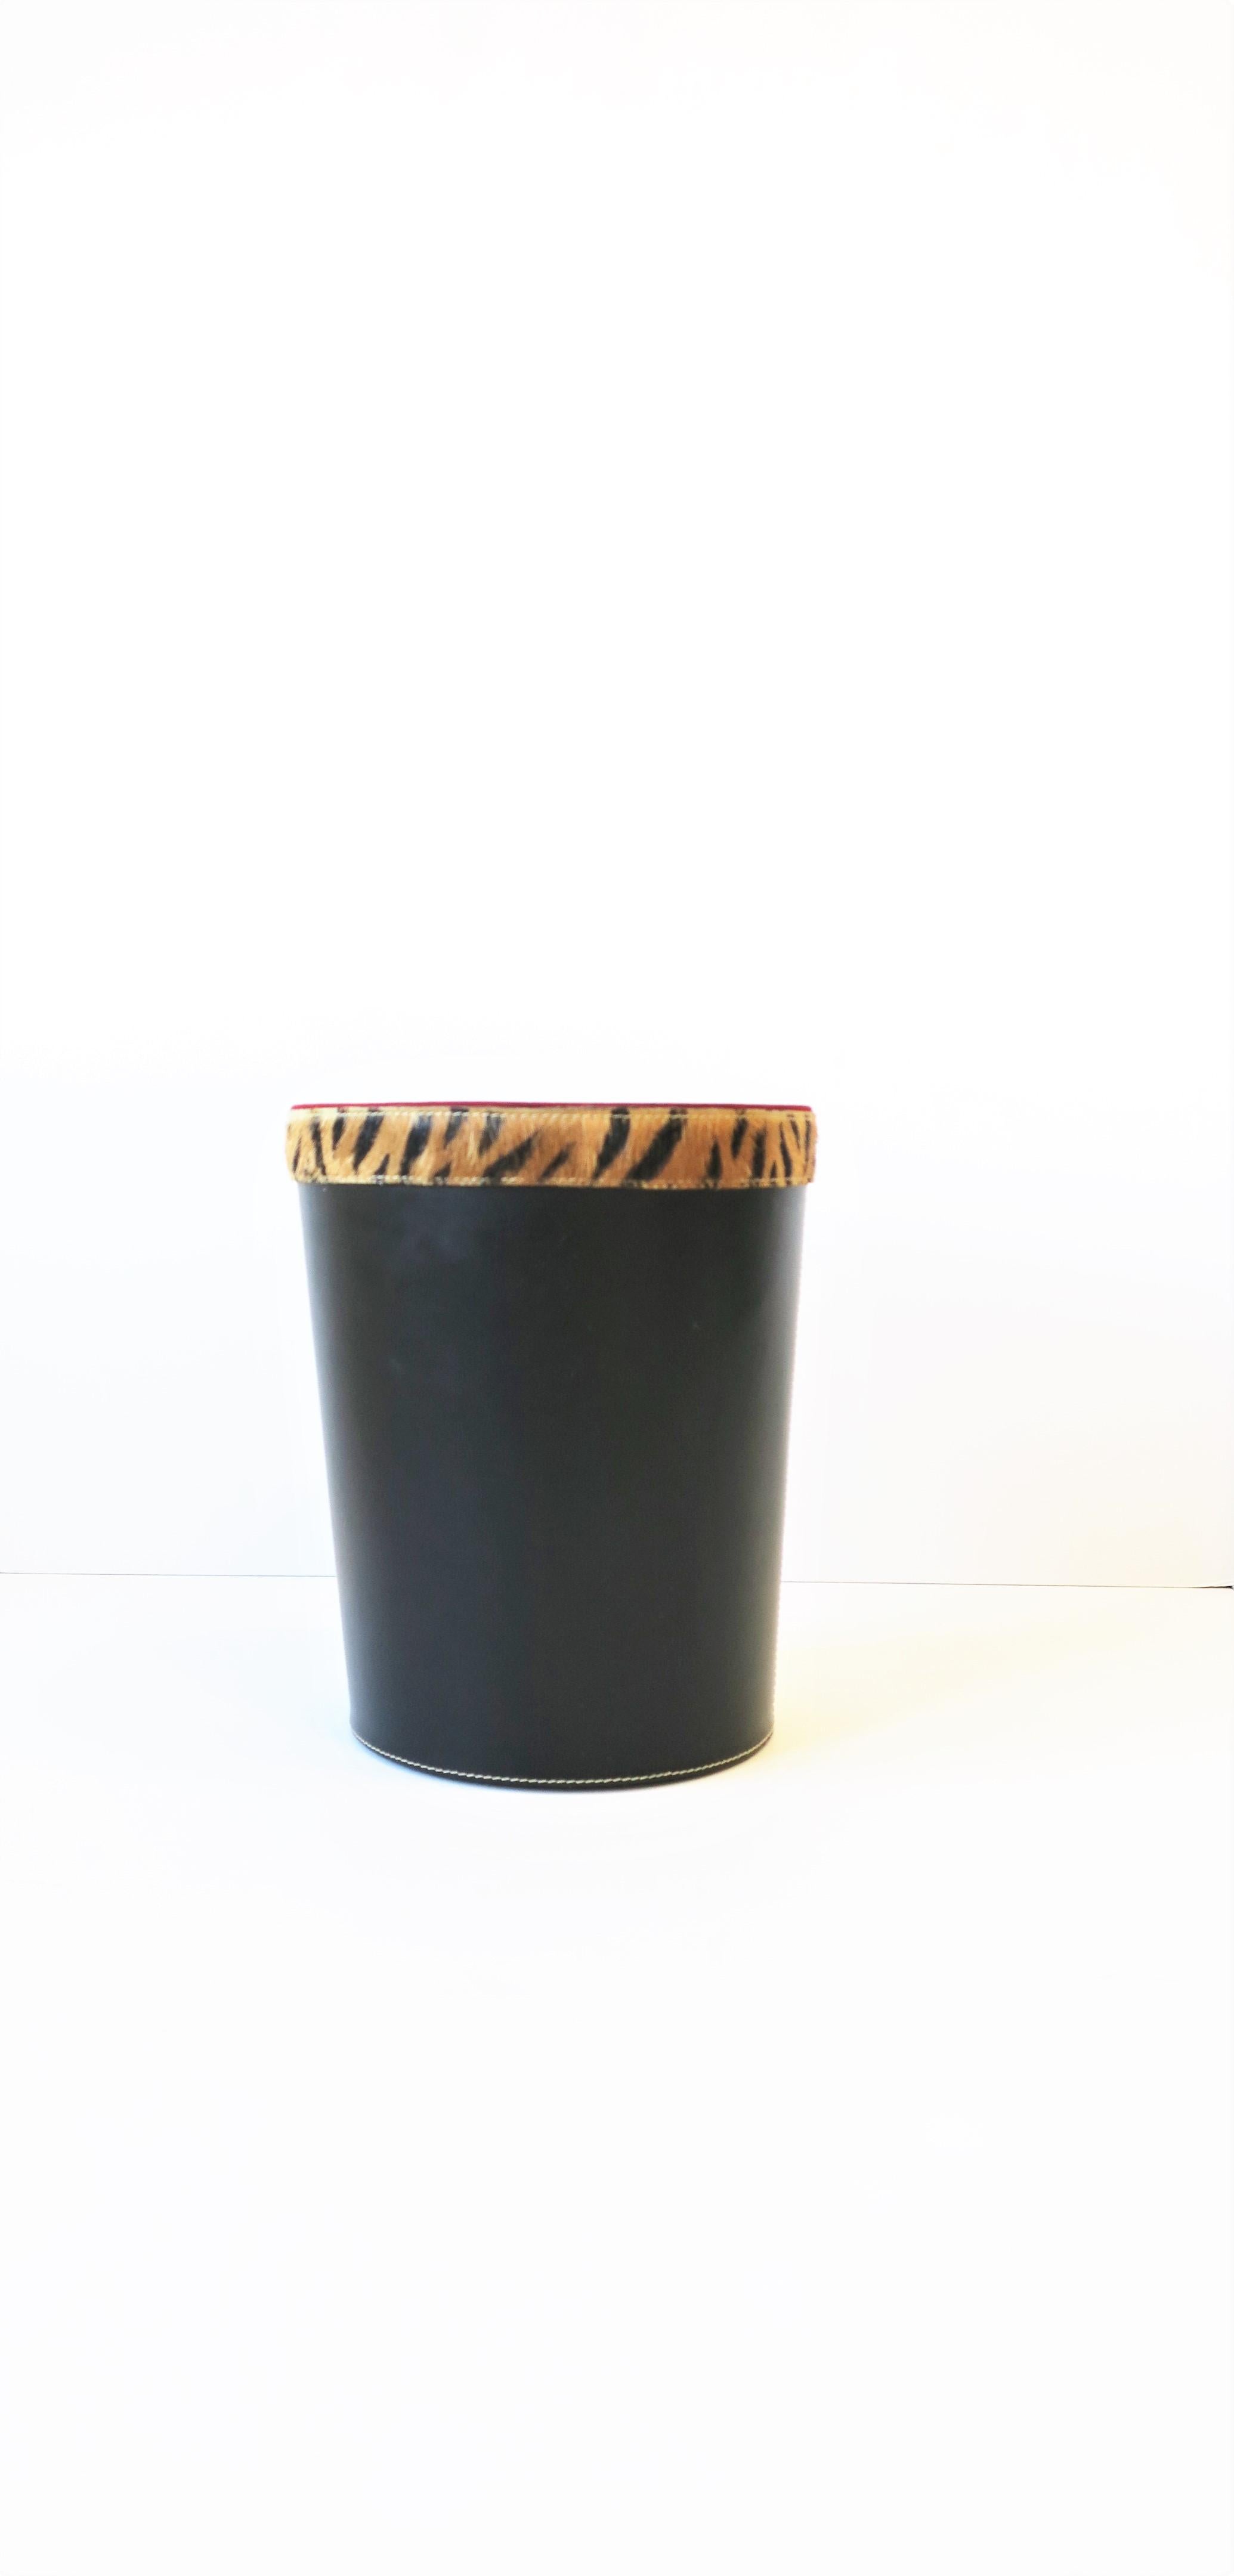 leopard trash can